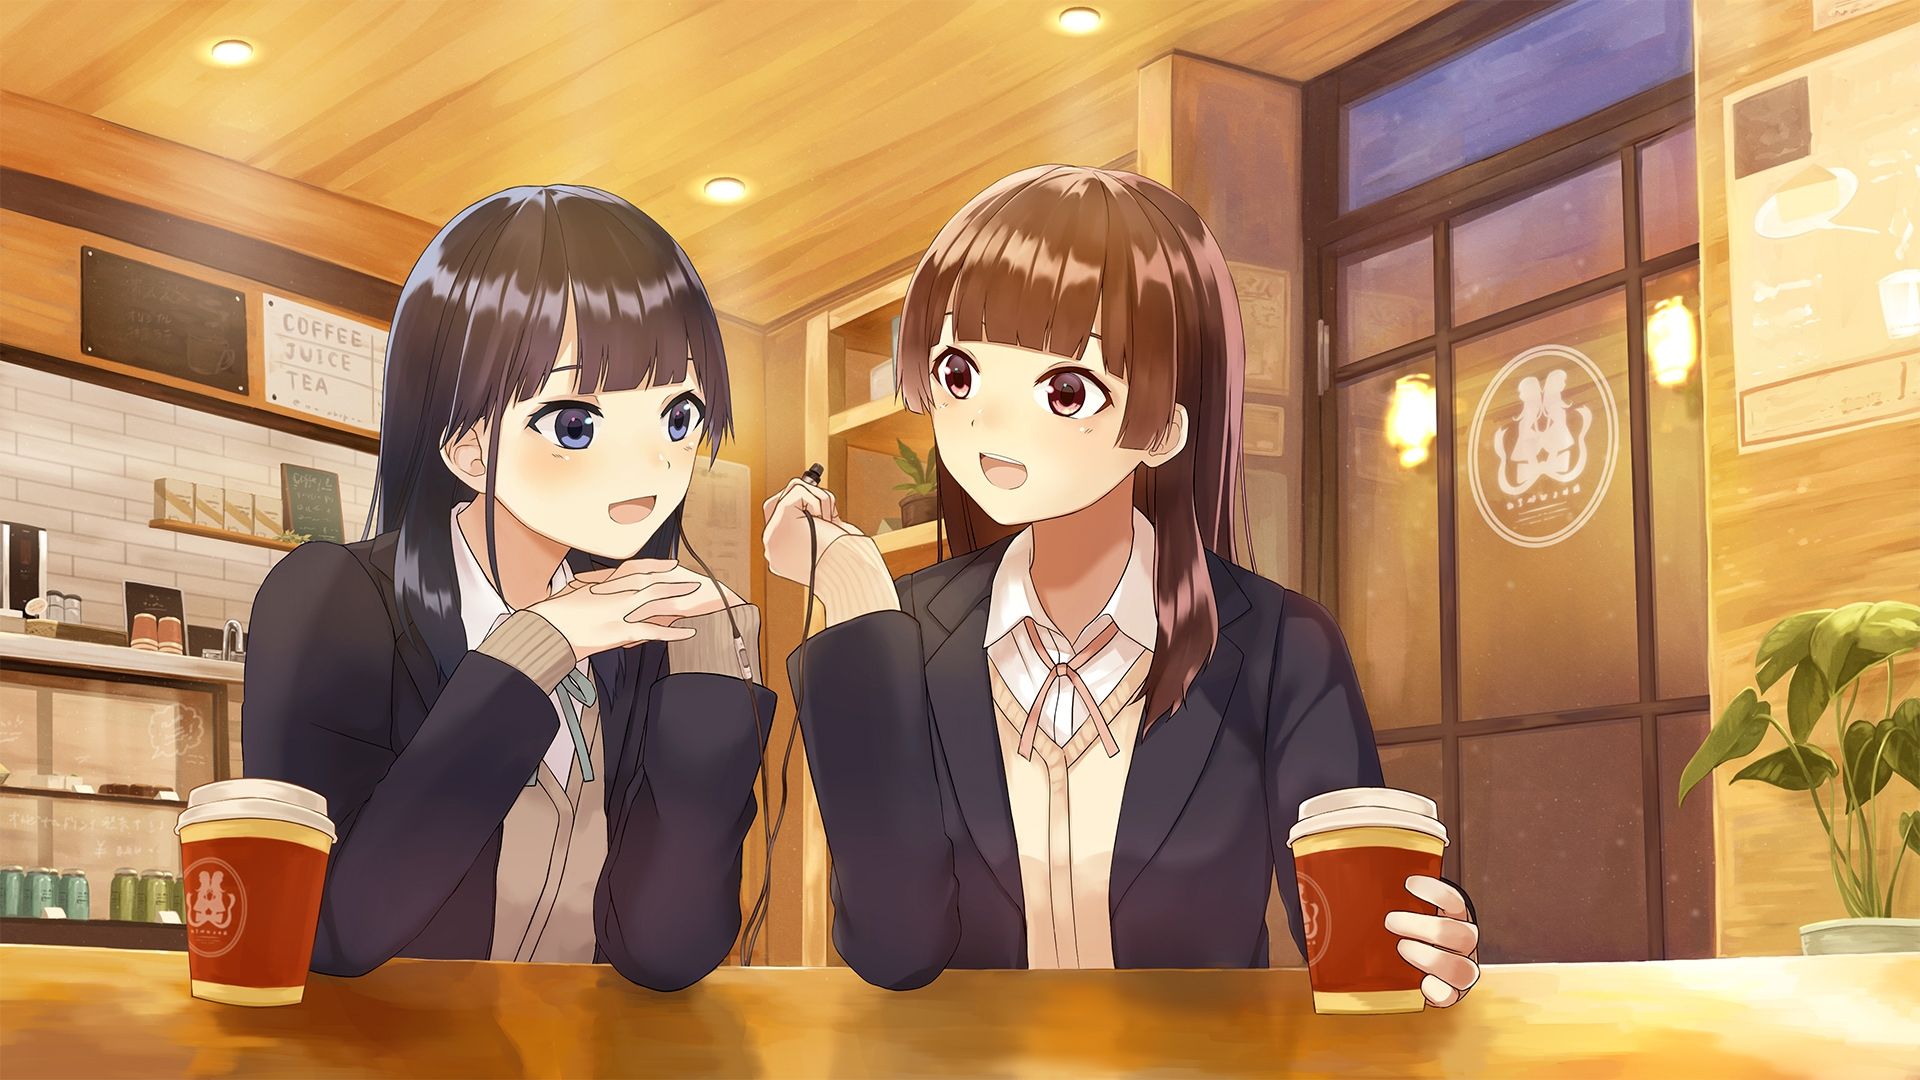 Download 1920x1080 Anime Girls, Coffee, Cafe, Friends, Drinks